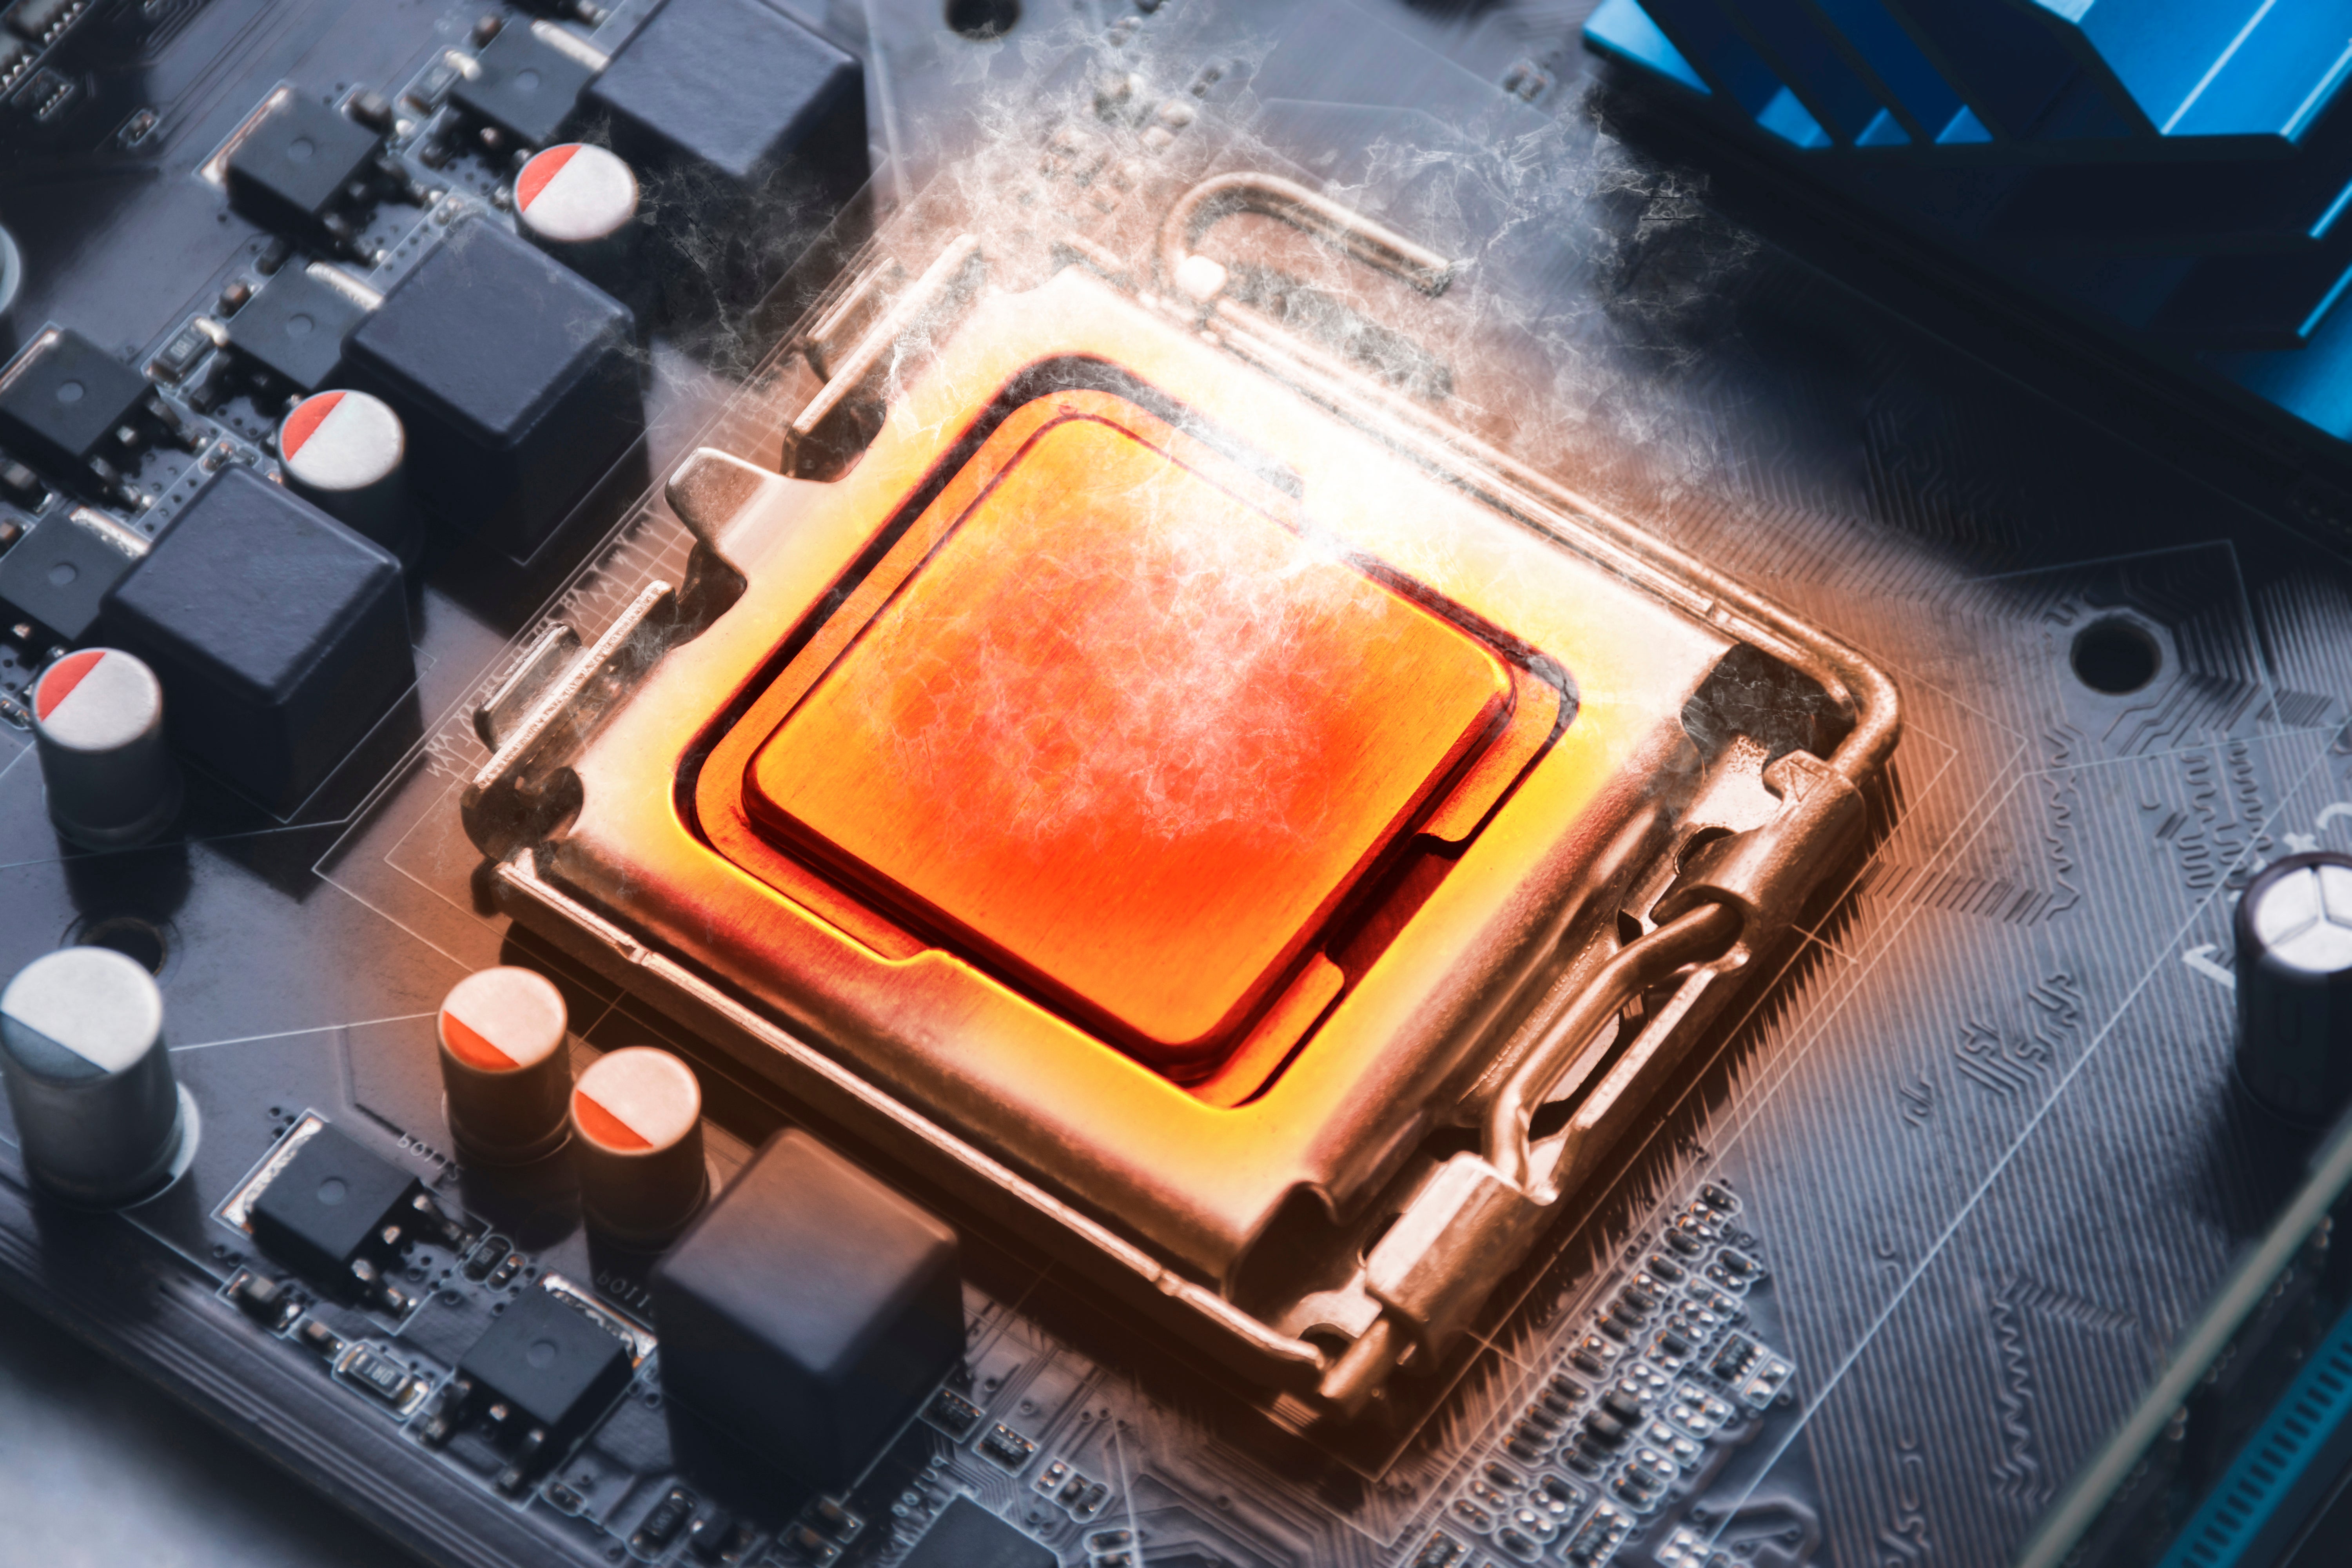 Scientists Finally Invent Heat-Controlling Circuitry That Keeps Electronics Cool